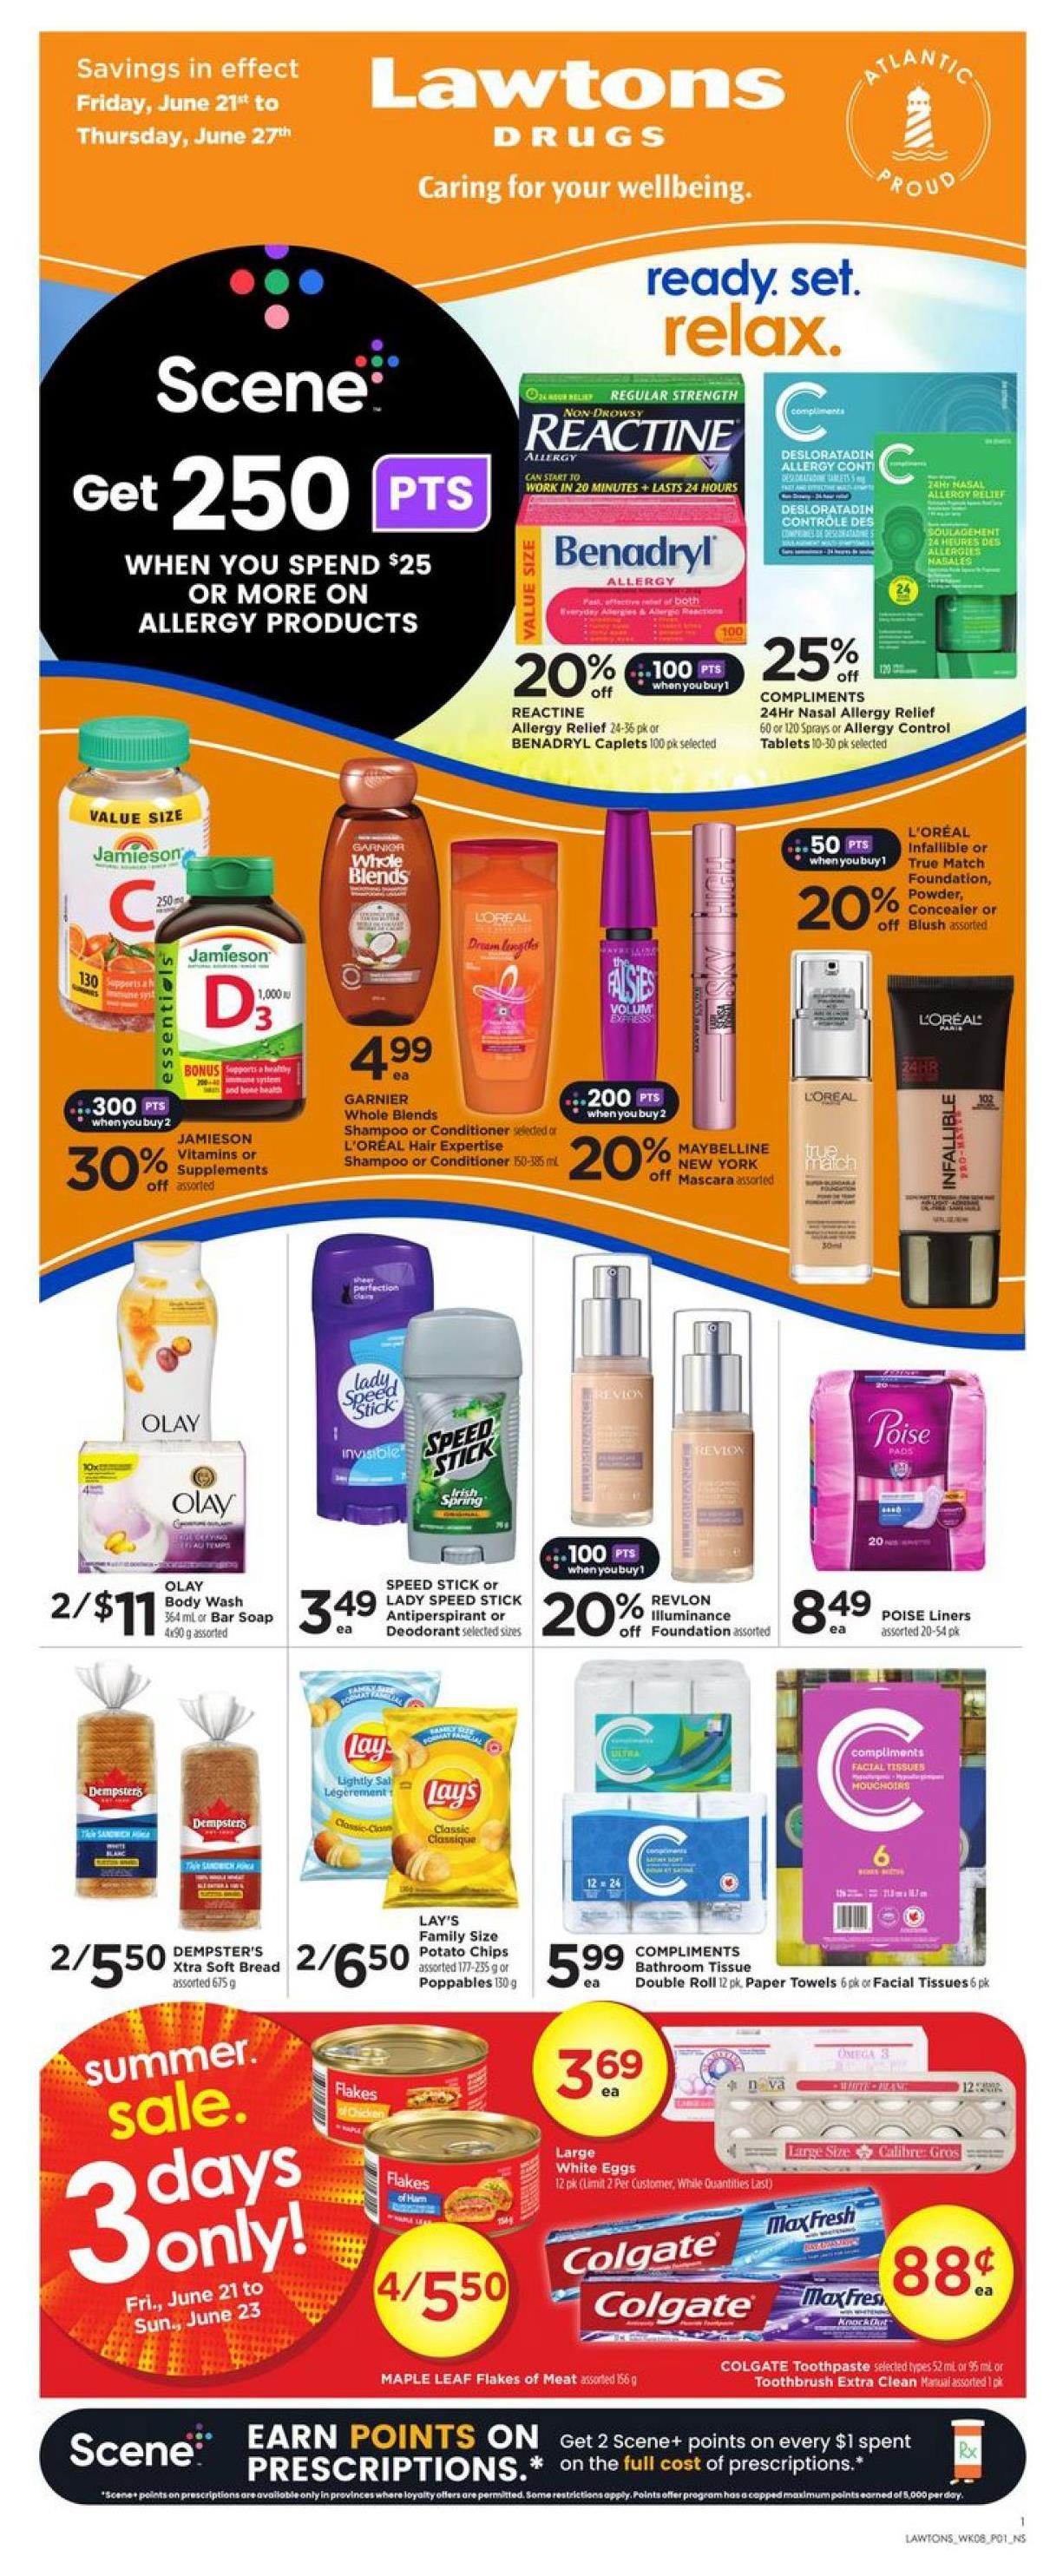 Lawtons Drugs - Weekly Flyer Specials - Page 1